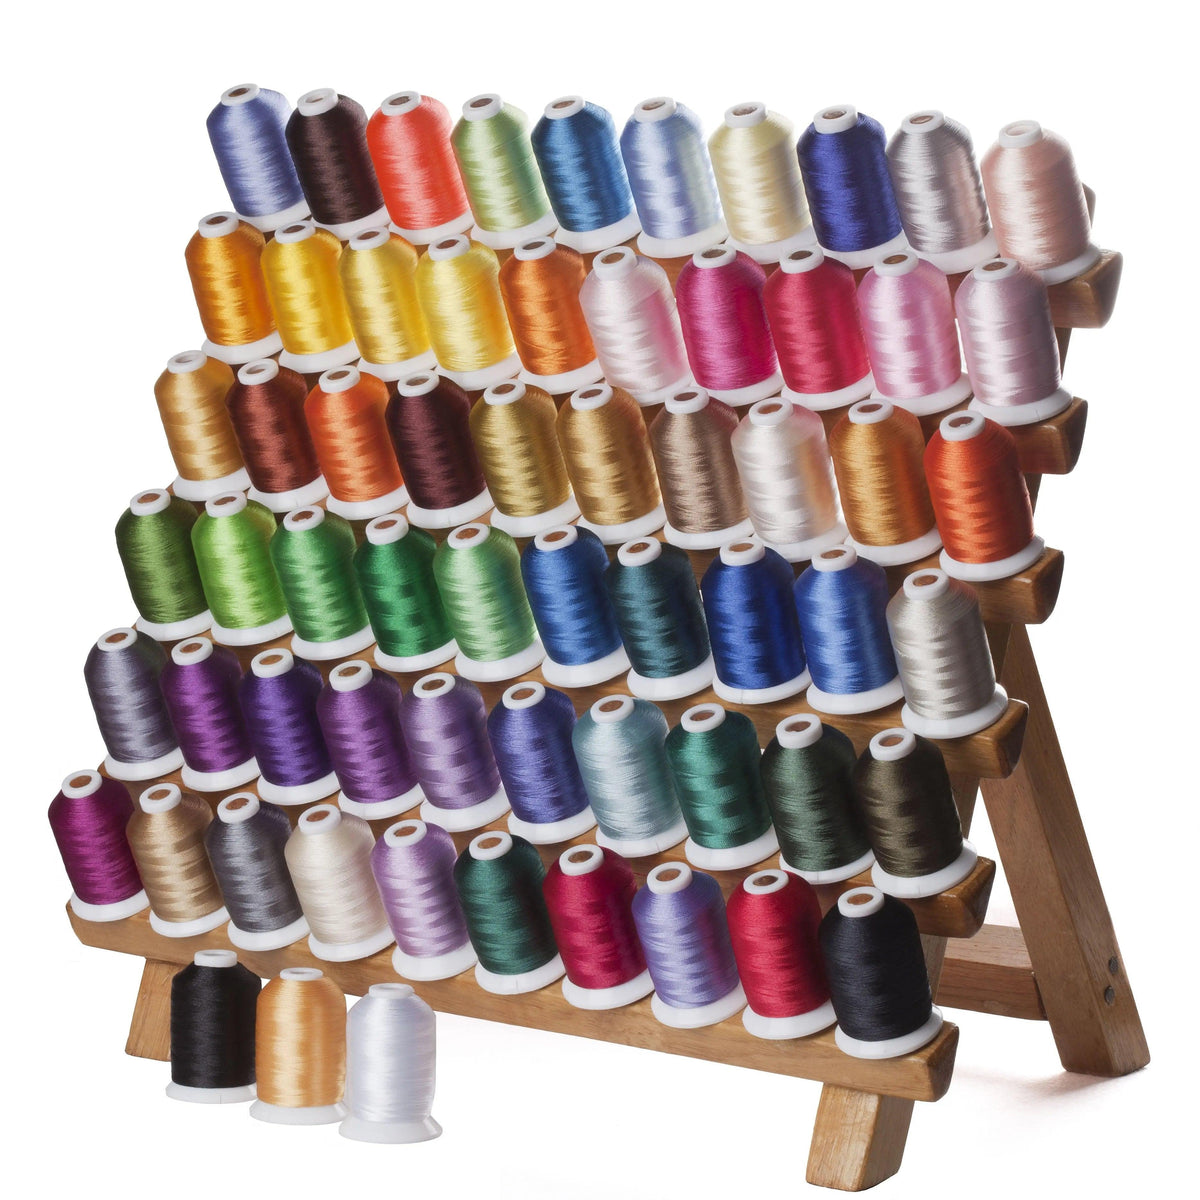 160 Colors Machine Embroidery Thread - Polyester, 1000M, Kit, Set —